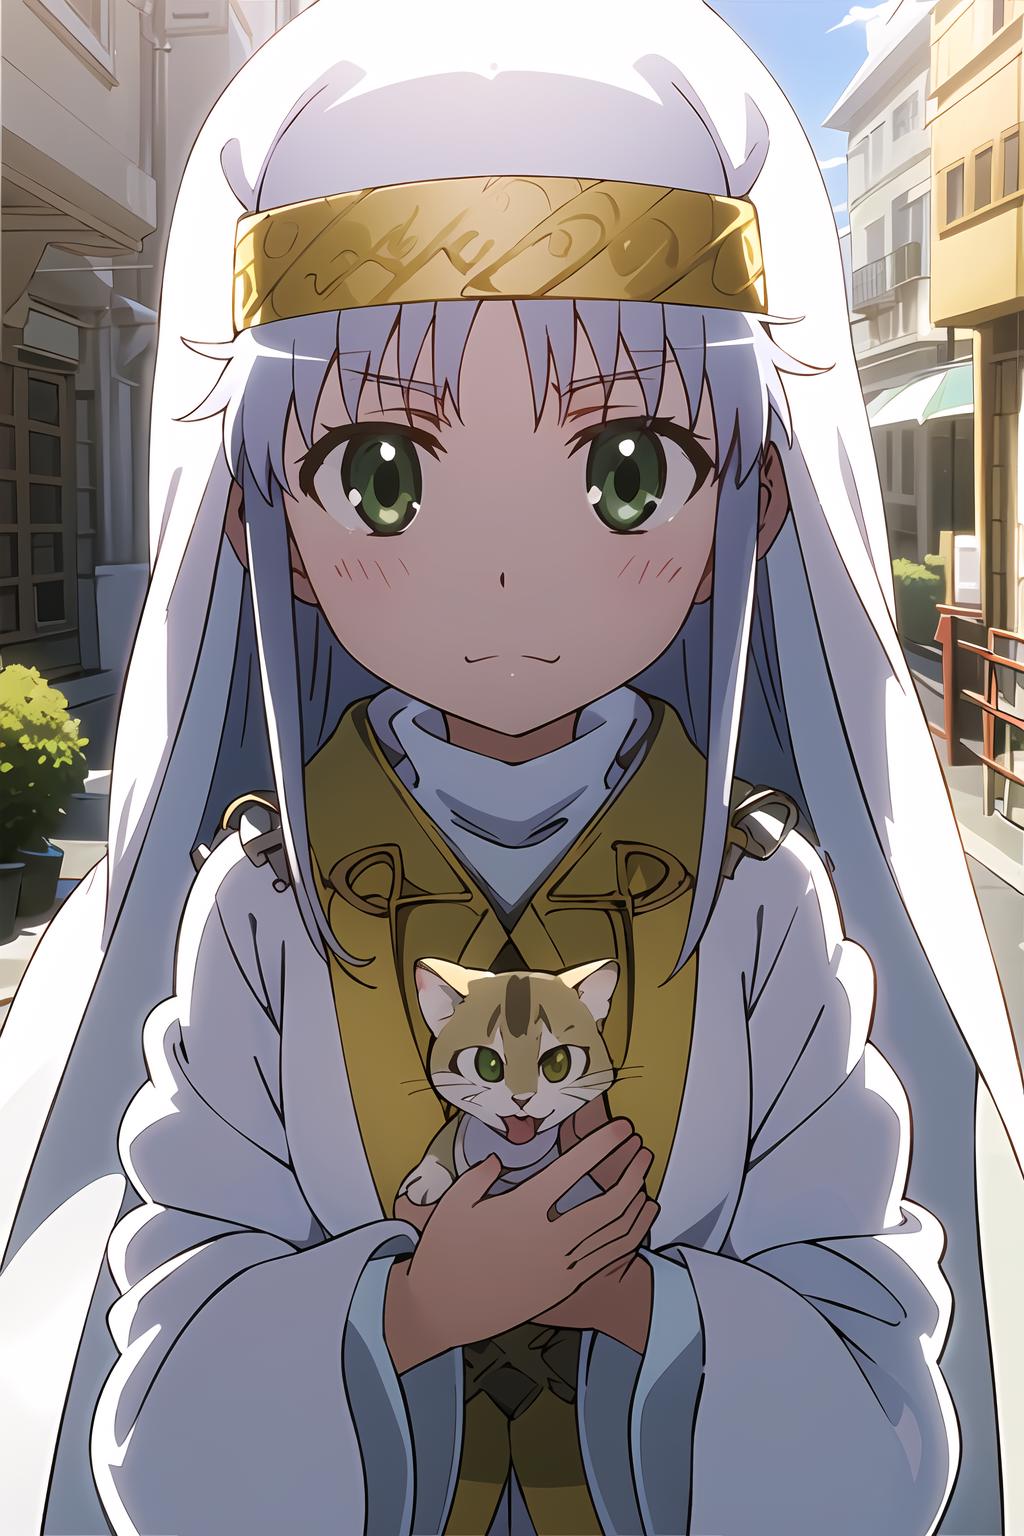 A Certain Magical Index Anime Review  The Man Who Will Punch Anyone   YouTube